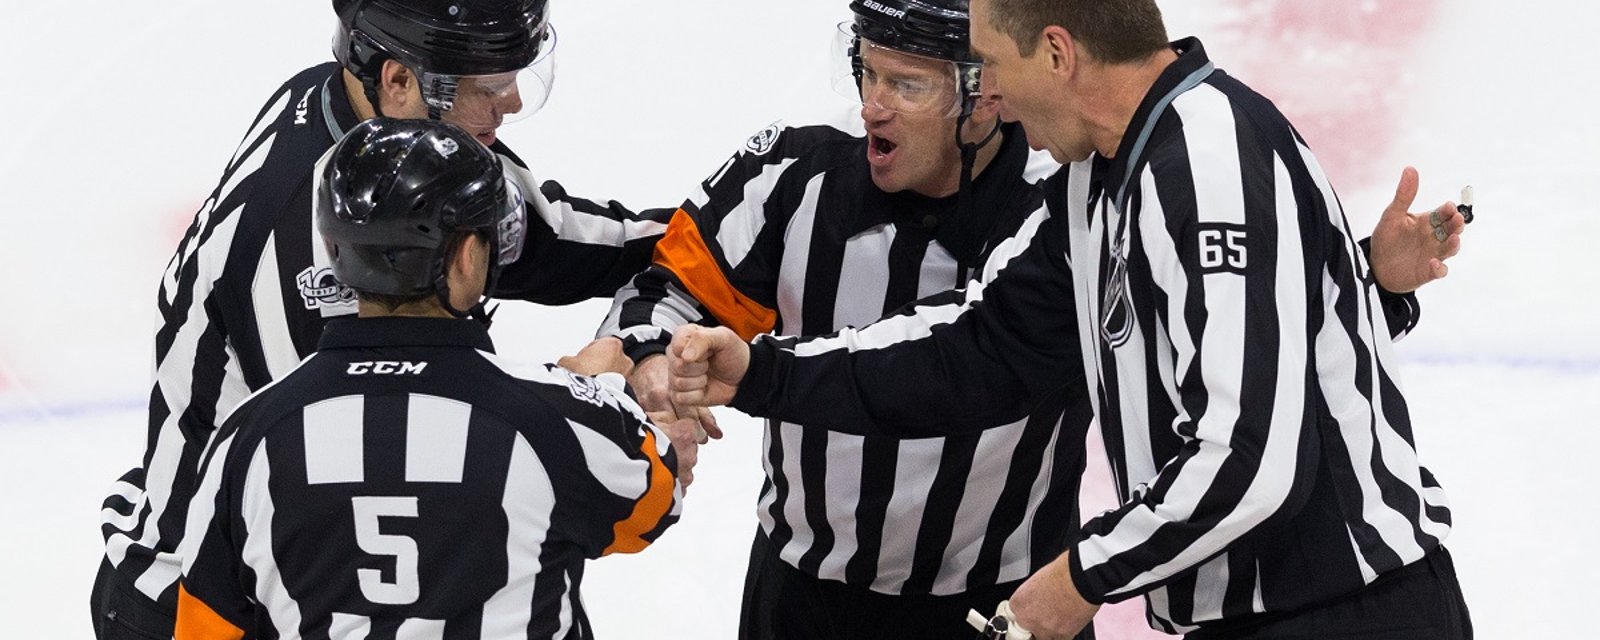 NHL players name the Top 5 “worst referees in the league.”